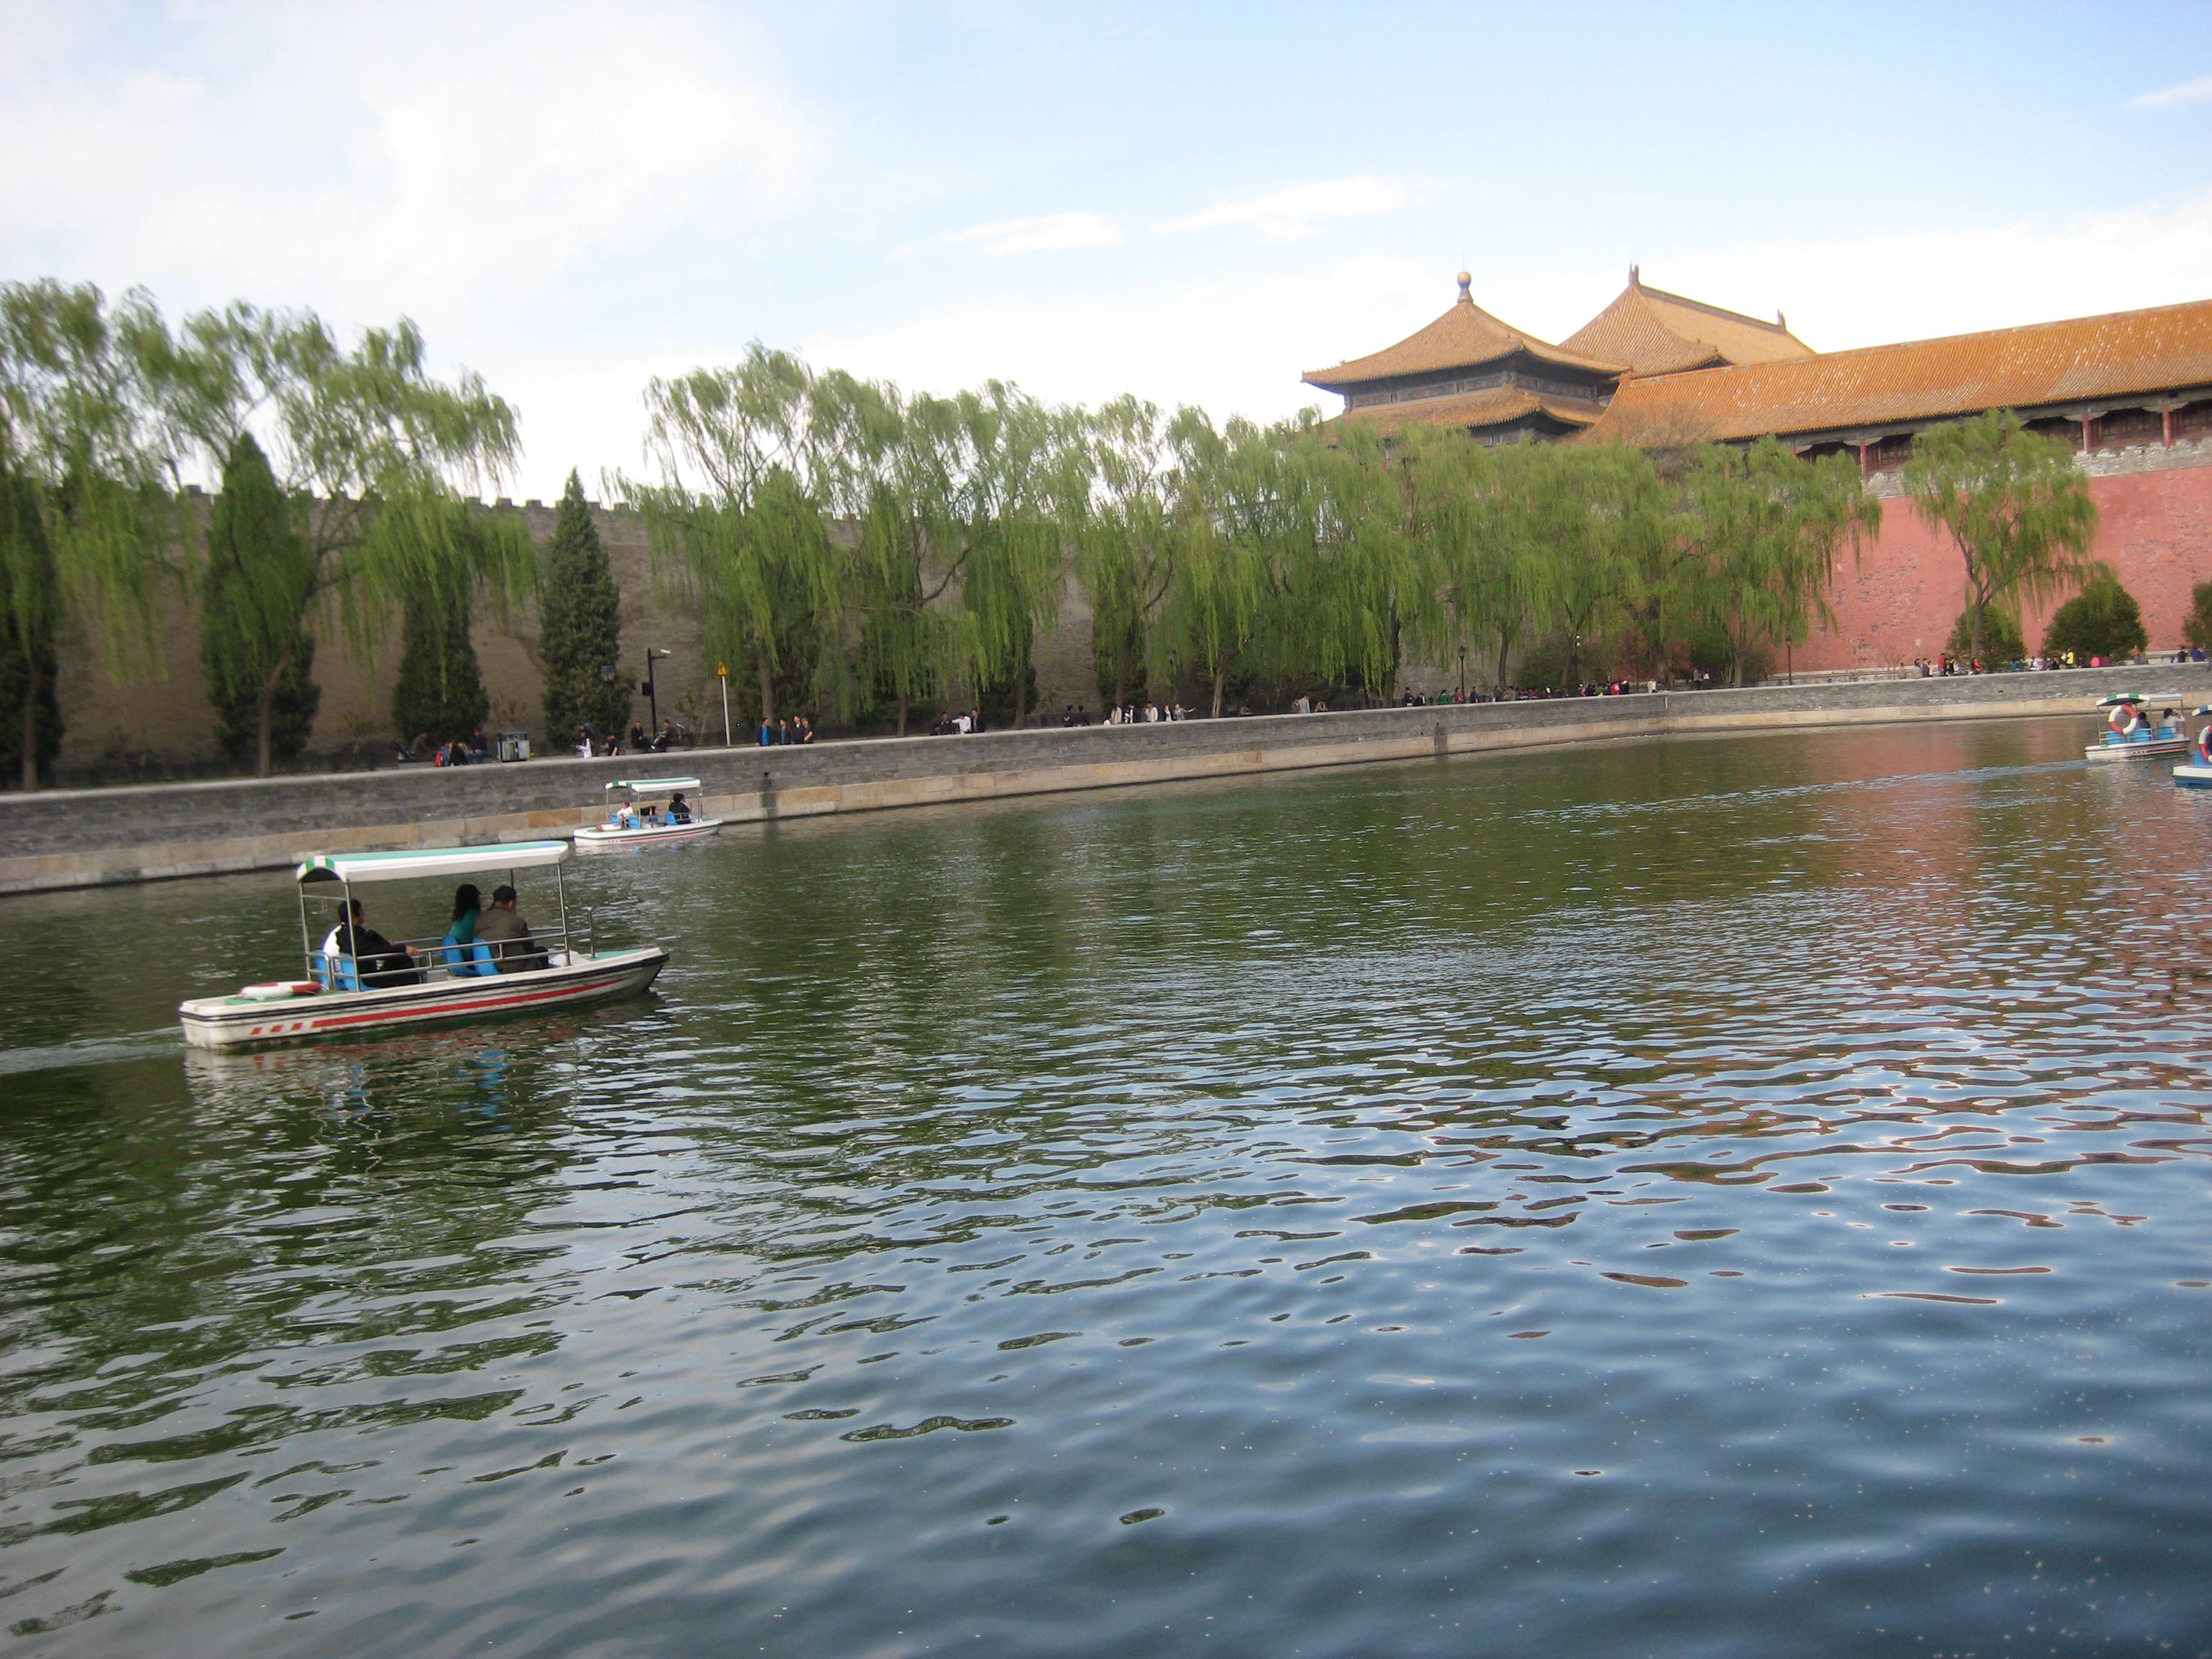 Lucky couples who've found their matches enjoy a sunny day on the moat of The Forbidden City